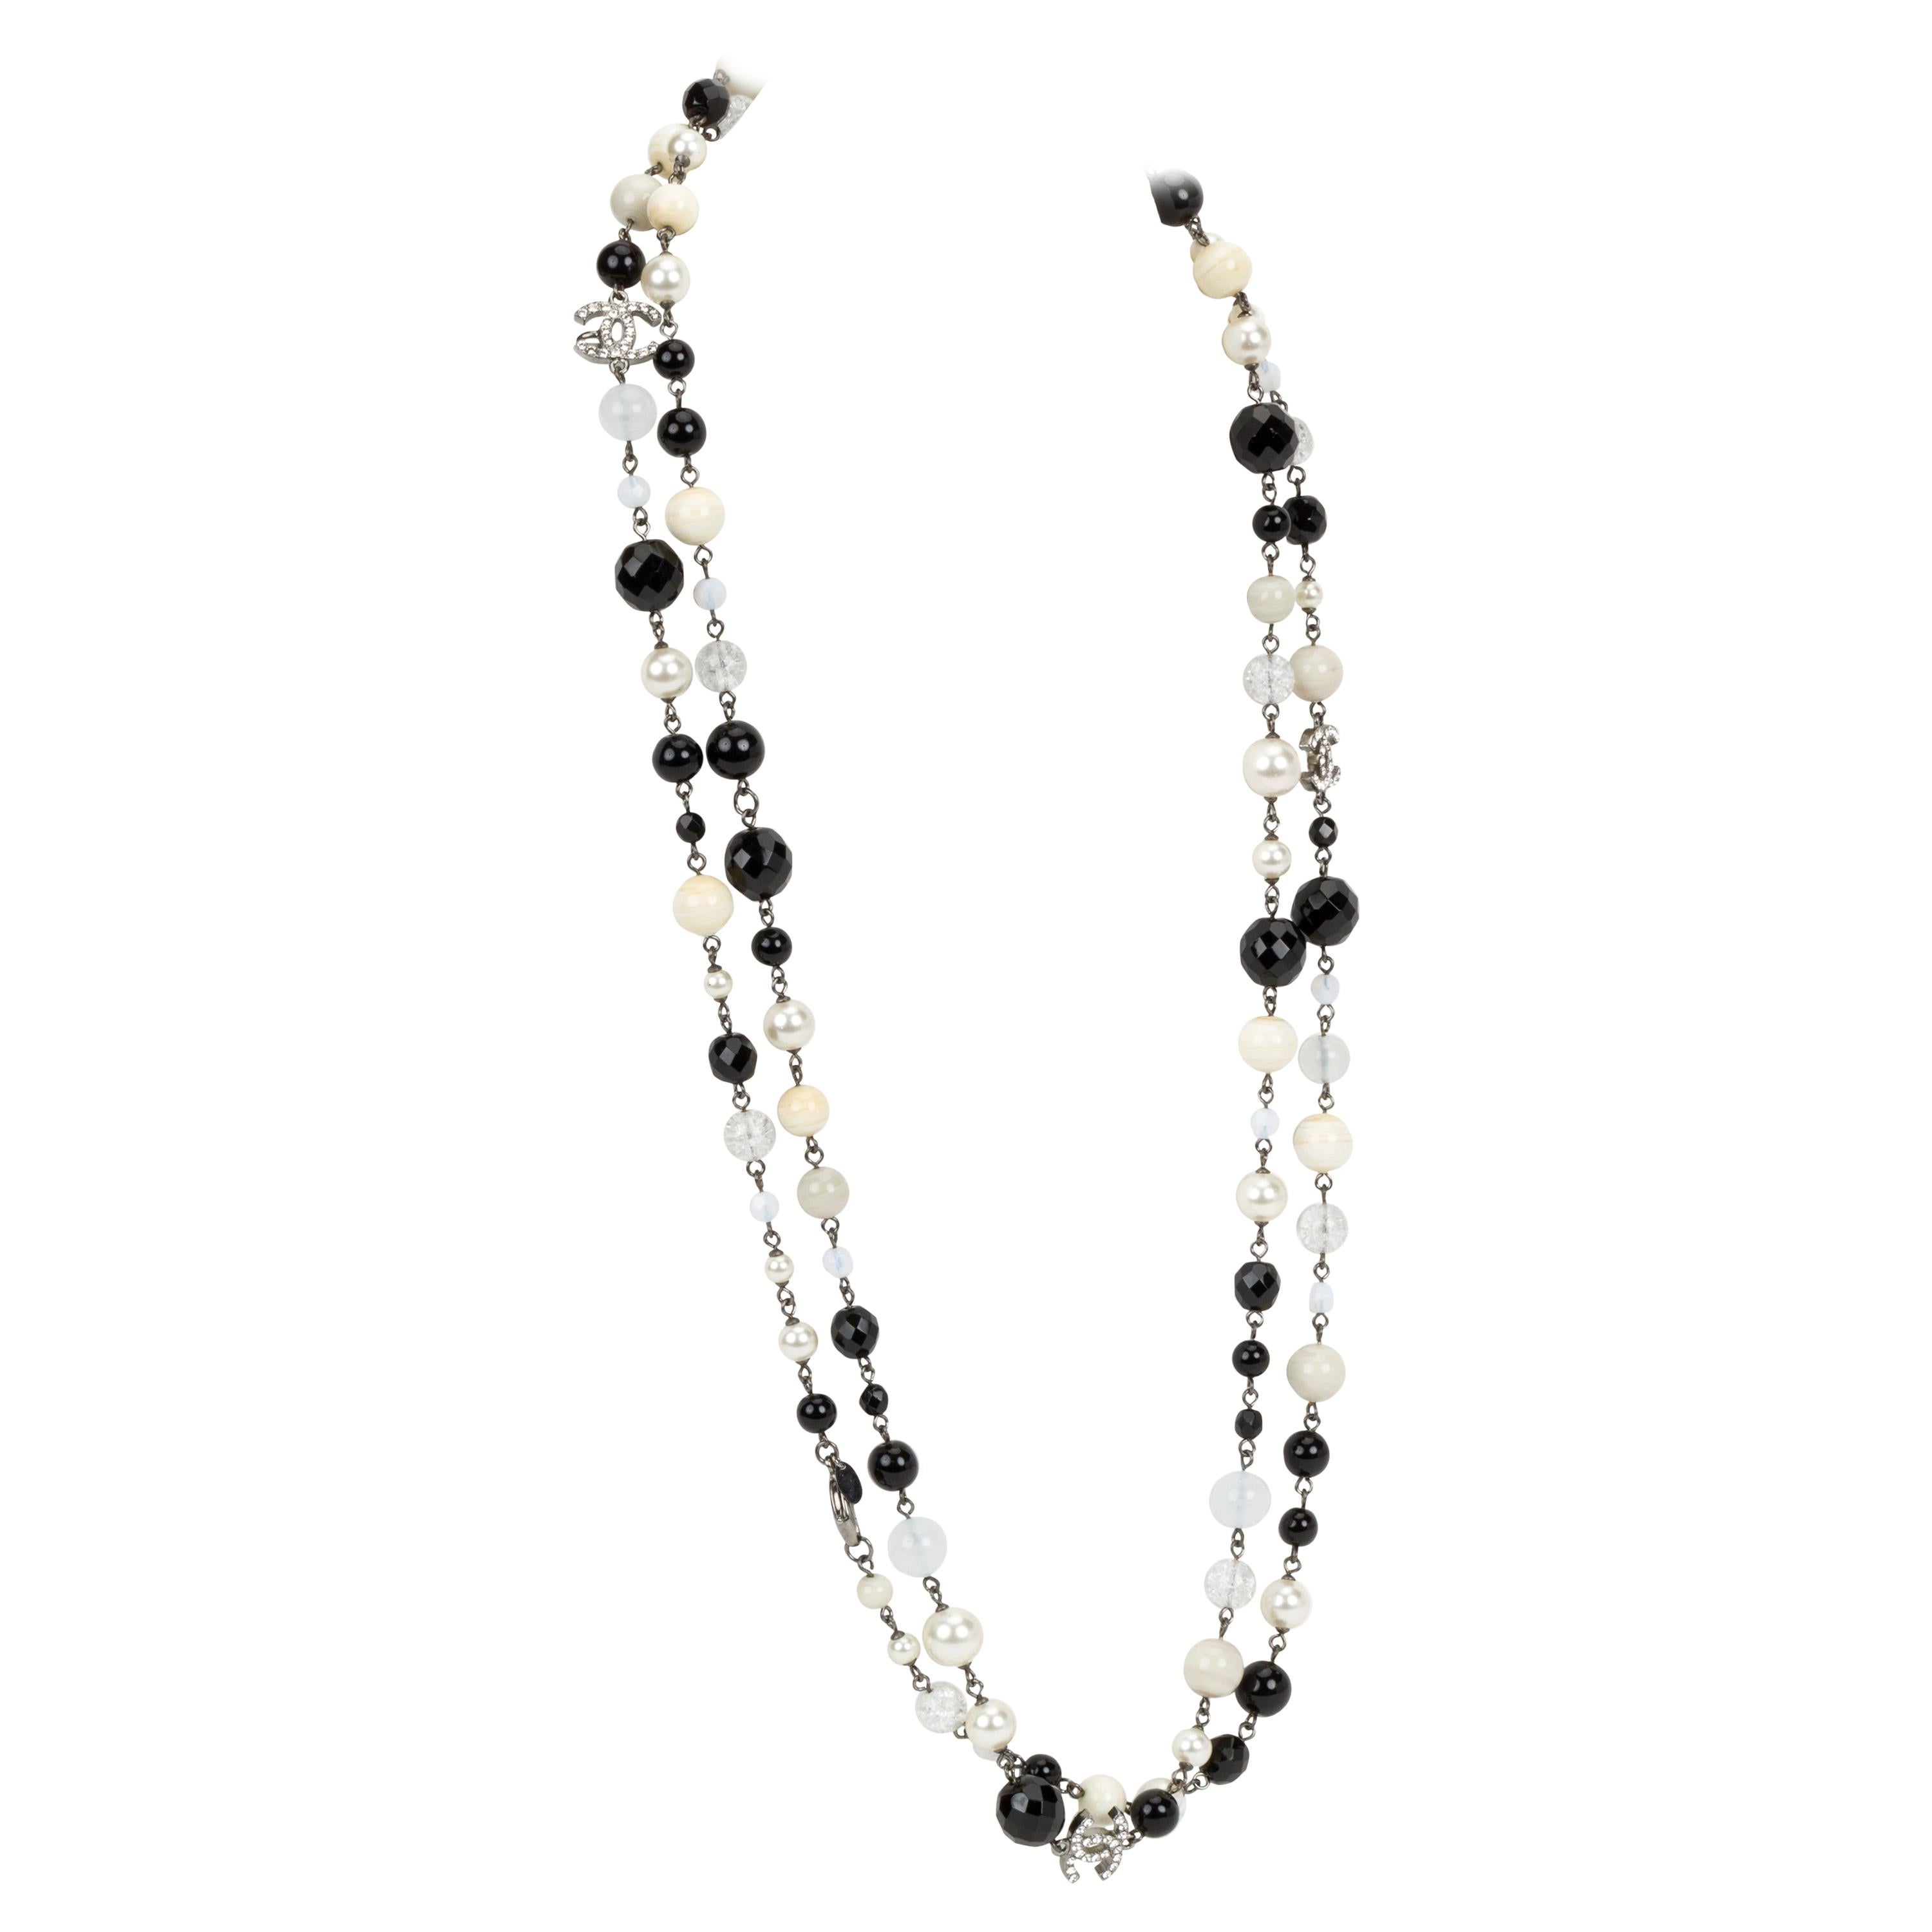 Chanel Classic Black & White Beaded Strand Necklace